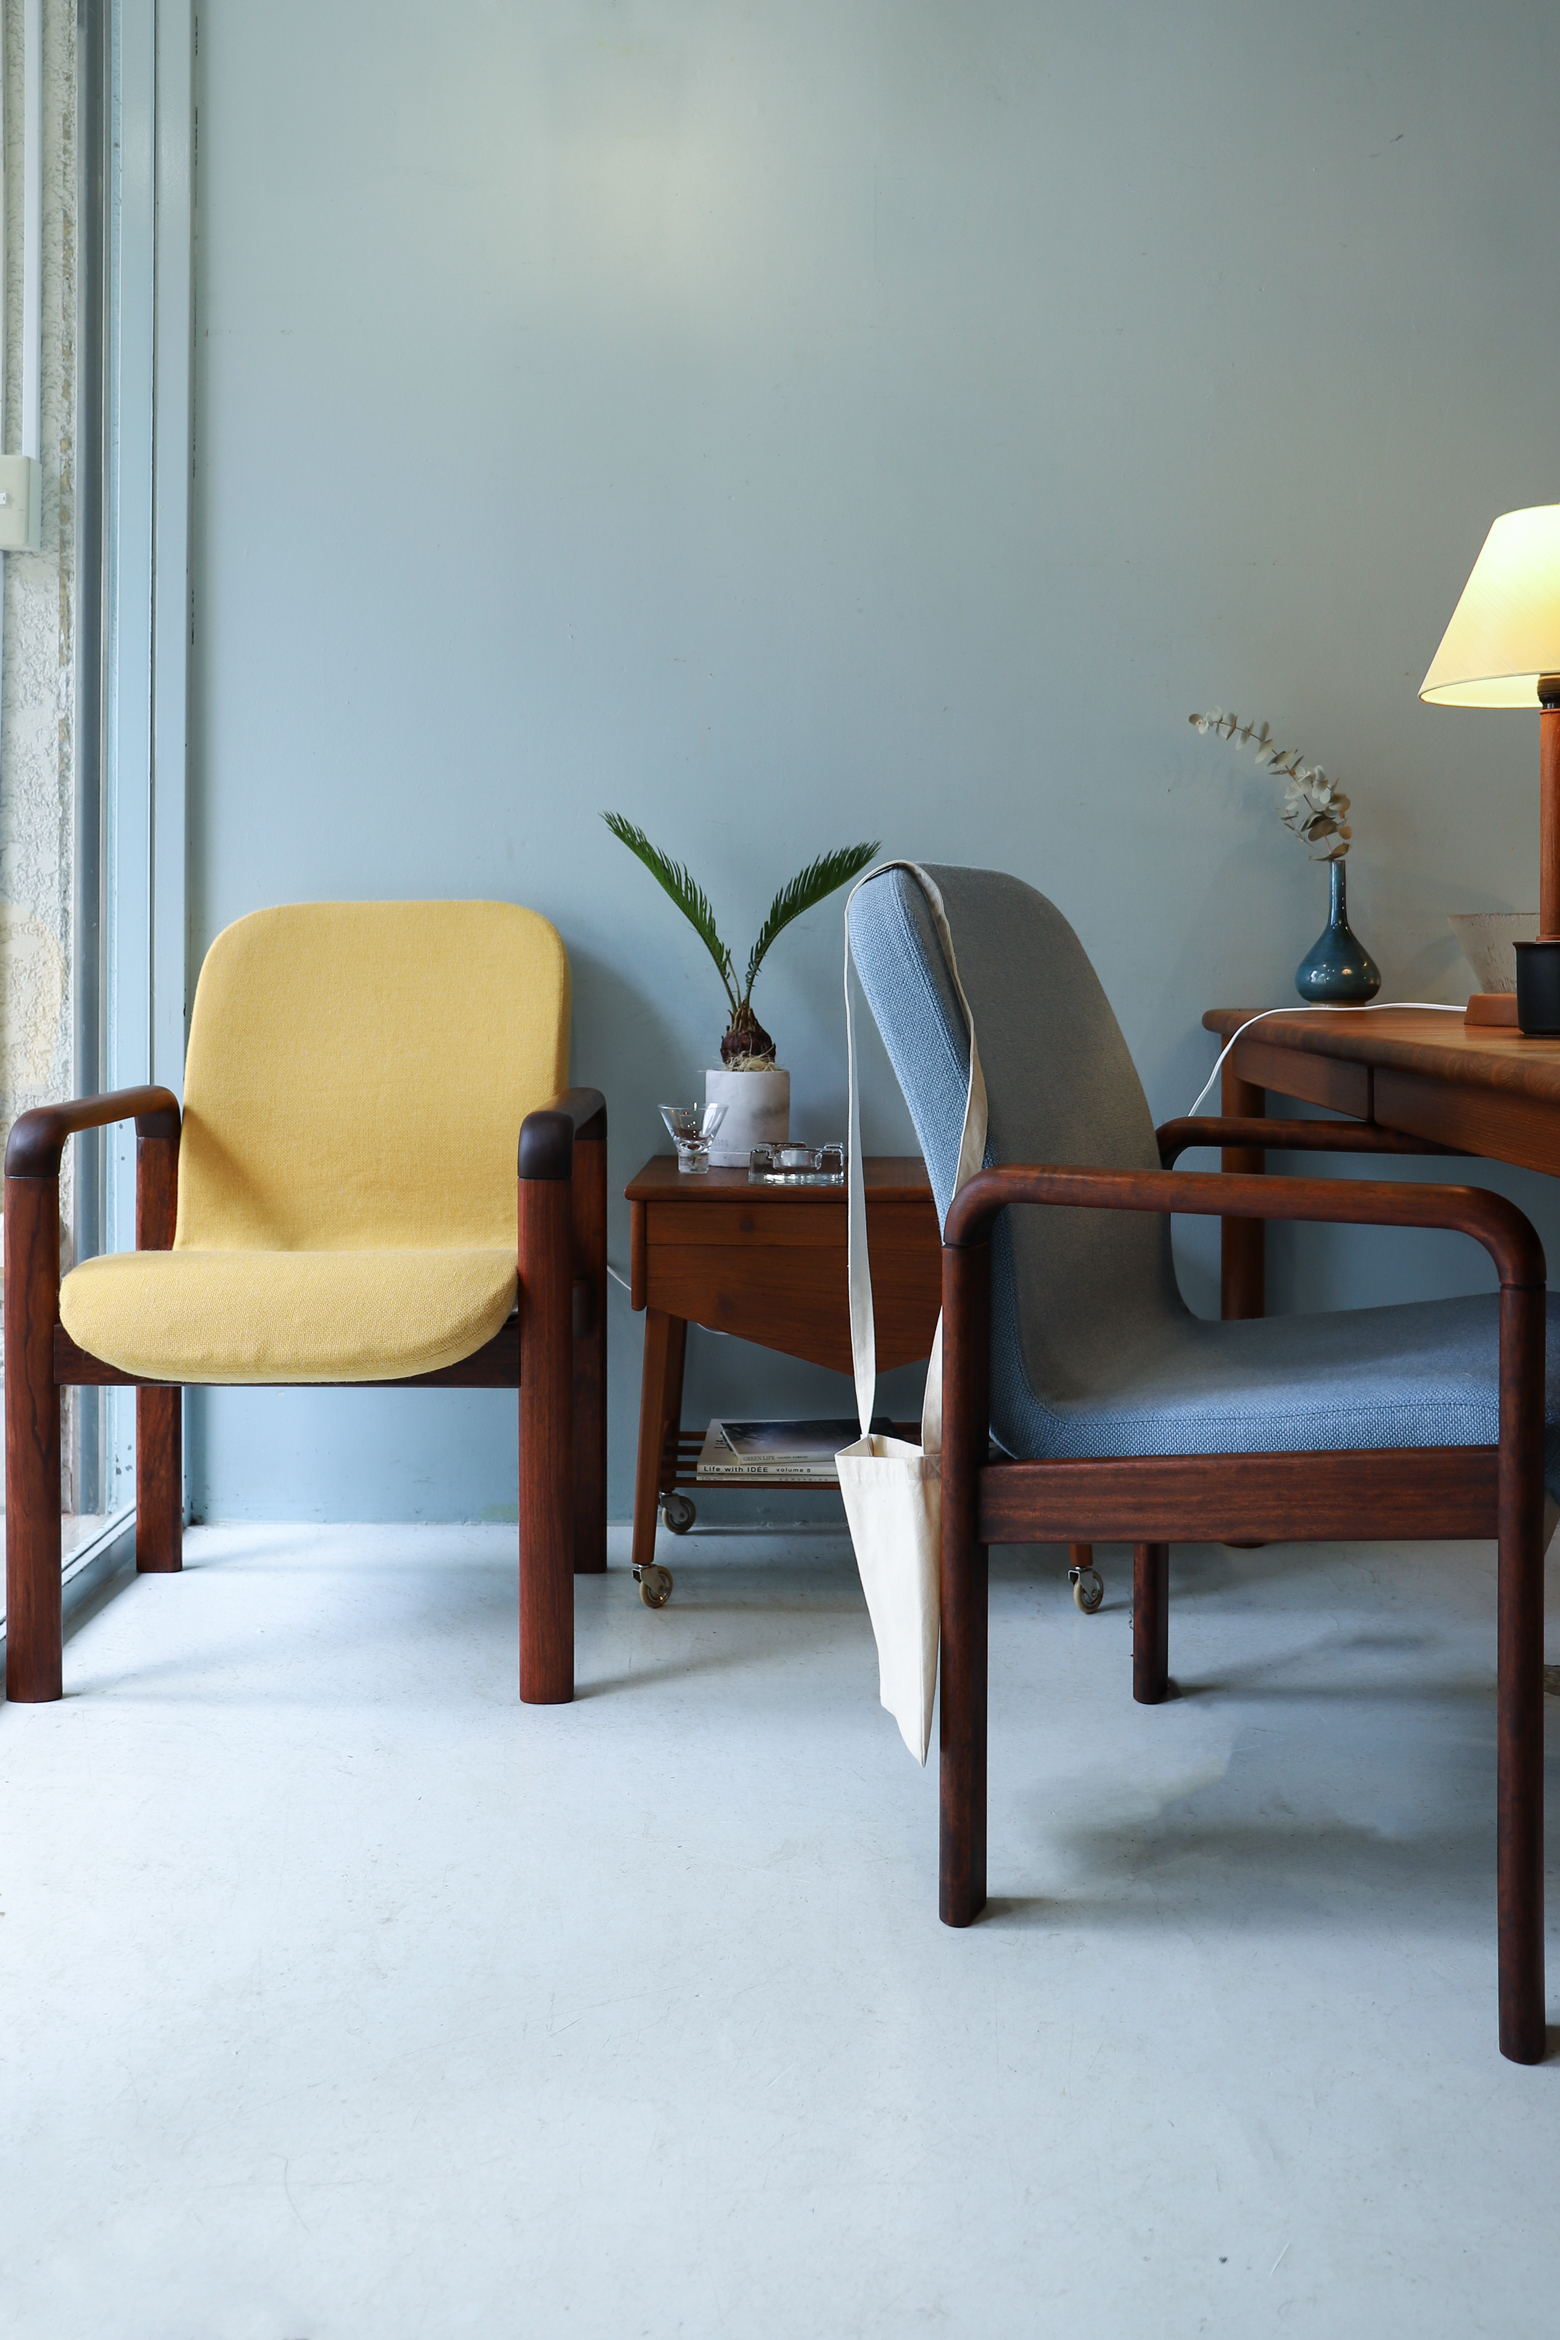 Danish Vintage Dyrlund Arm Chair/デンマーク ヴィンテージ デューロン アームチェア 北欧家具